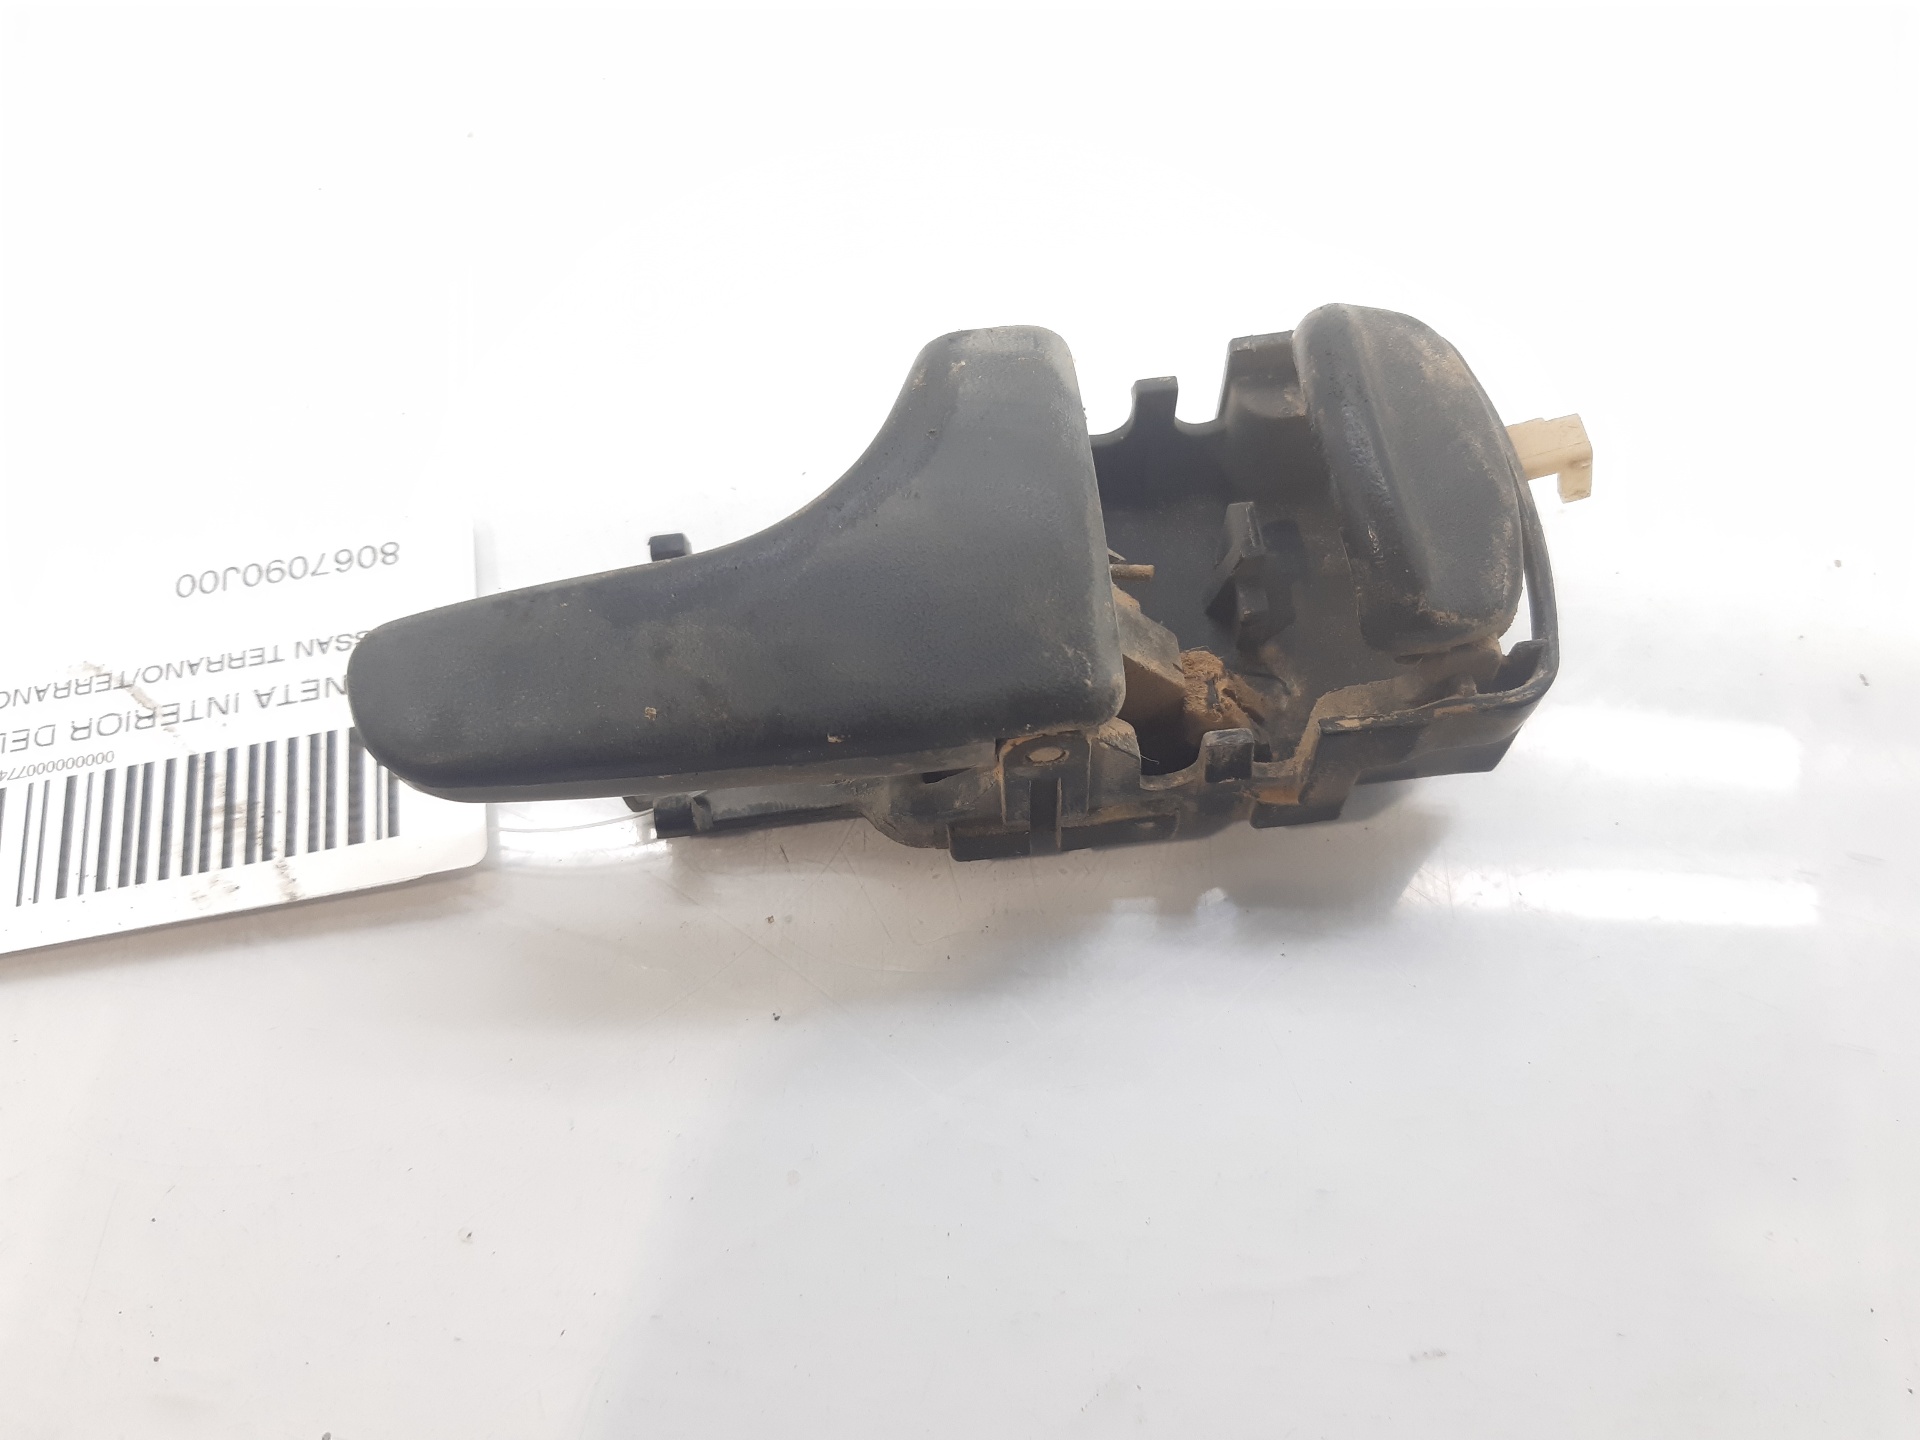 FORD Terrano 2 generation (1993-2006) Other Interior Parts 8067090J00 20147818